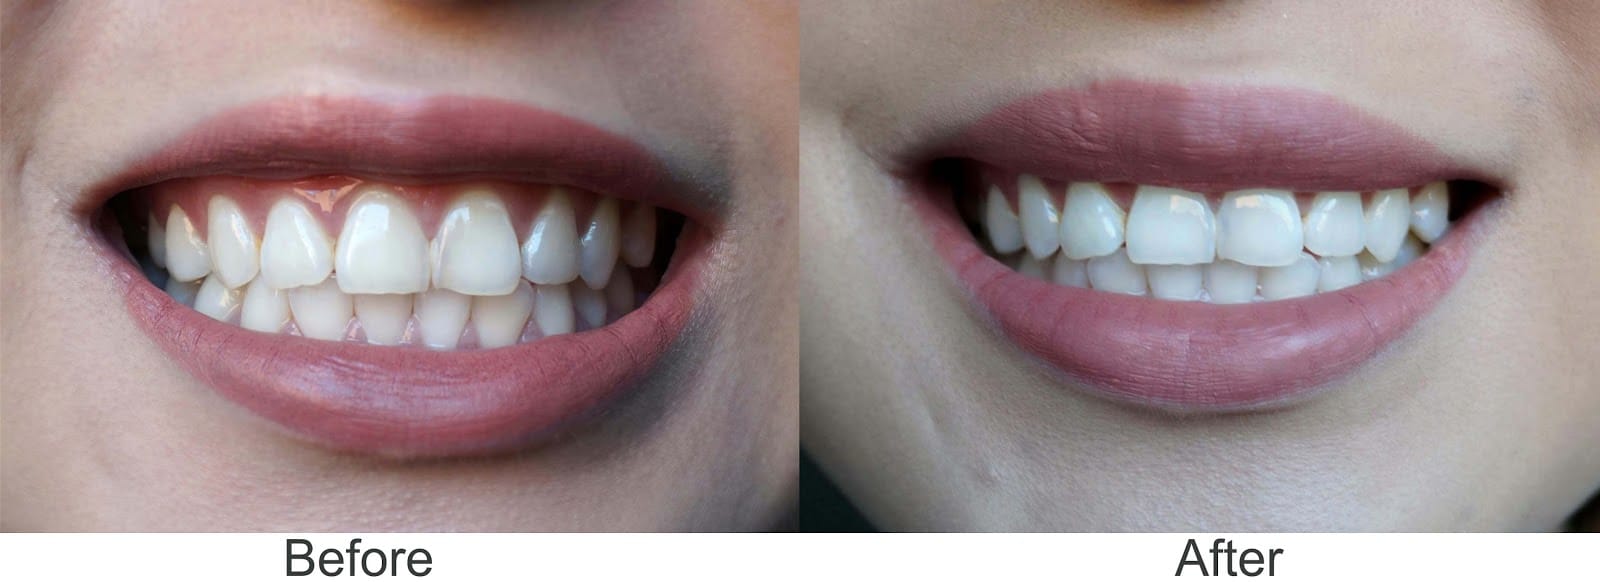 Sani White Toothbrush - Before and After Results